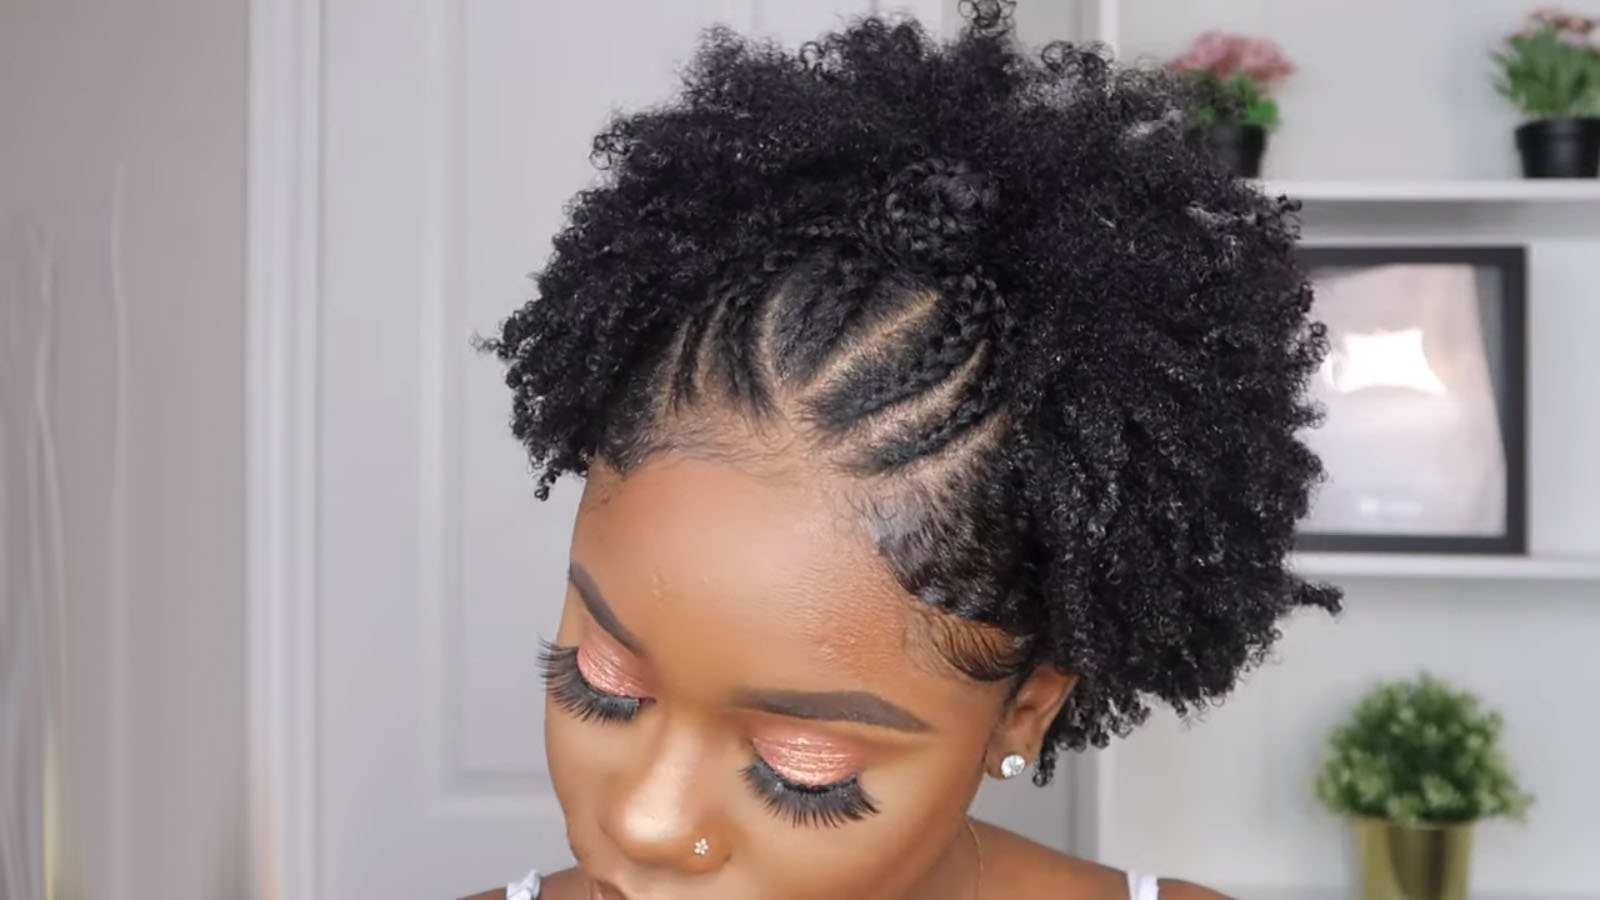 Easy hairstyles for girls that you can create in minutes